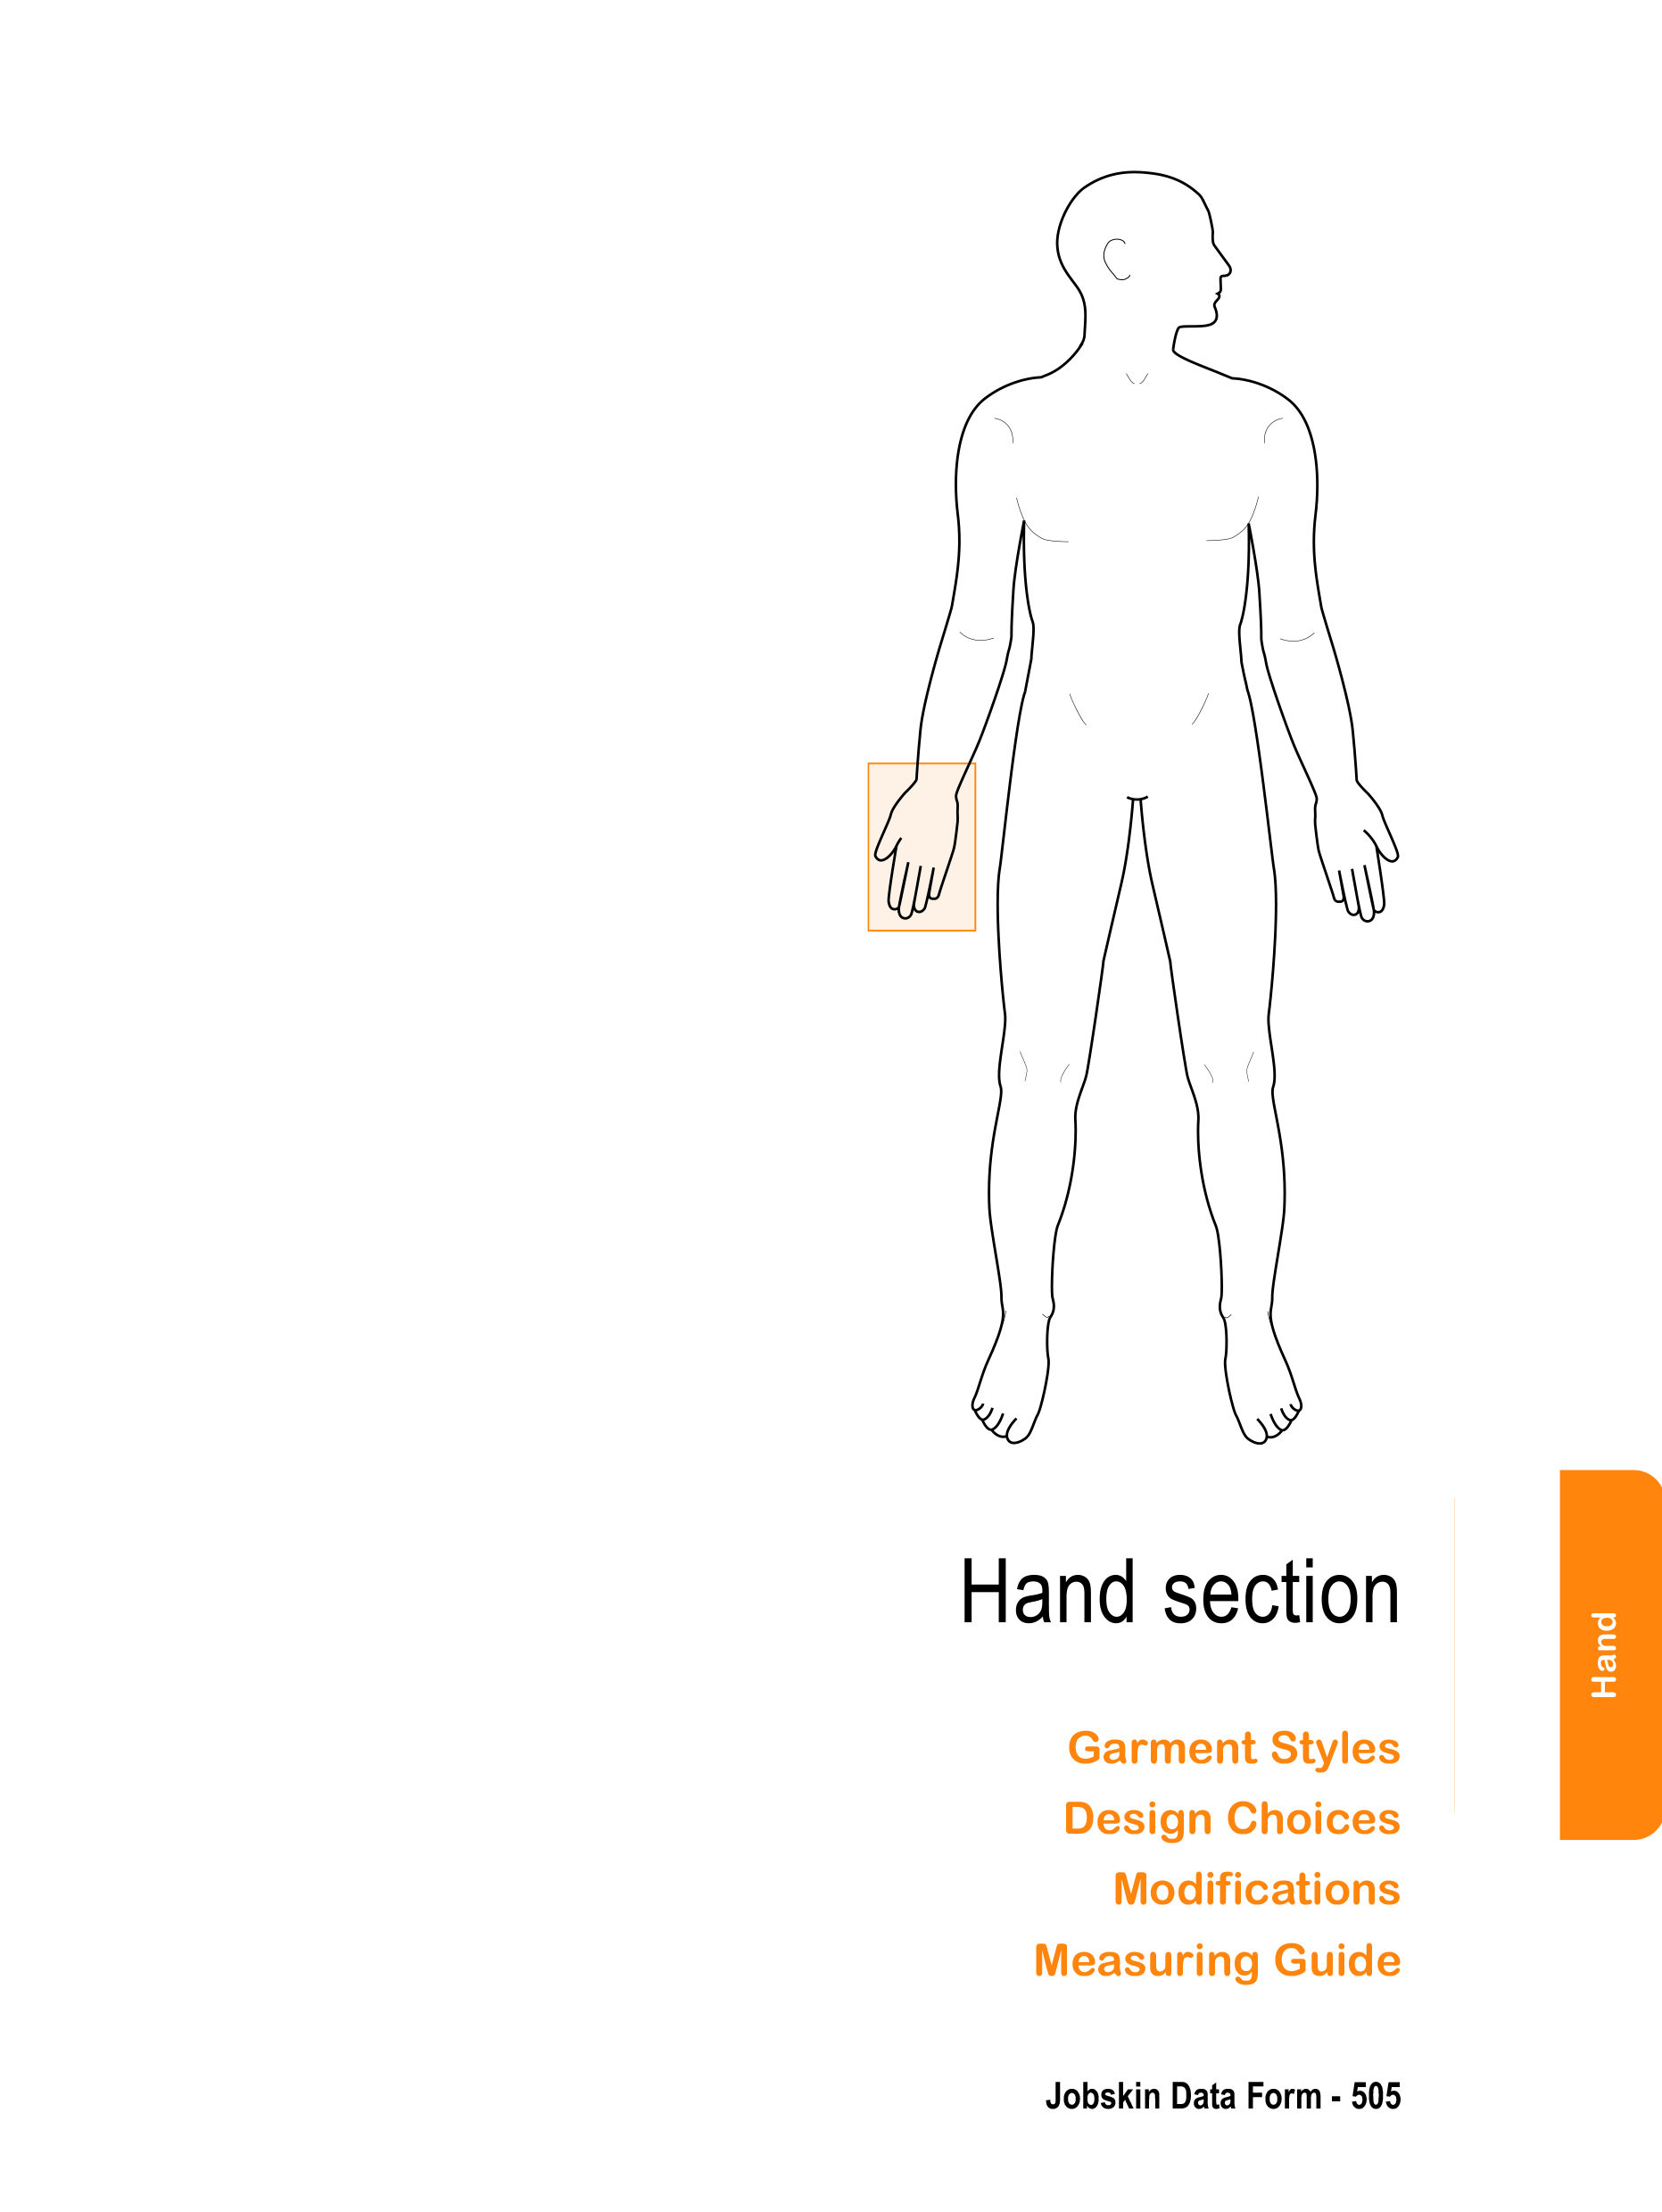 Hand how to measure section